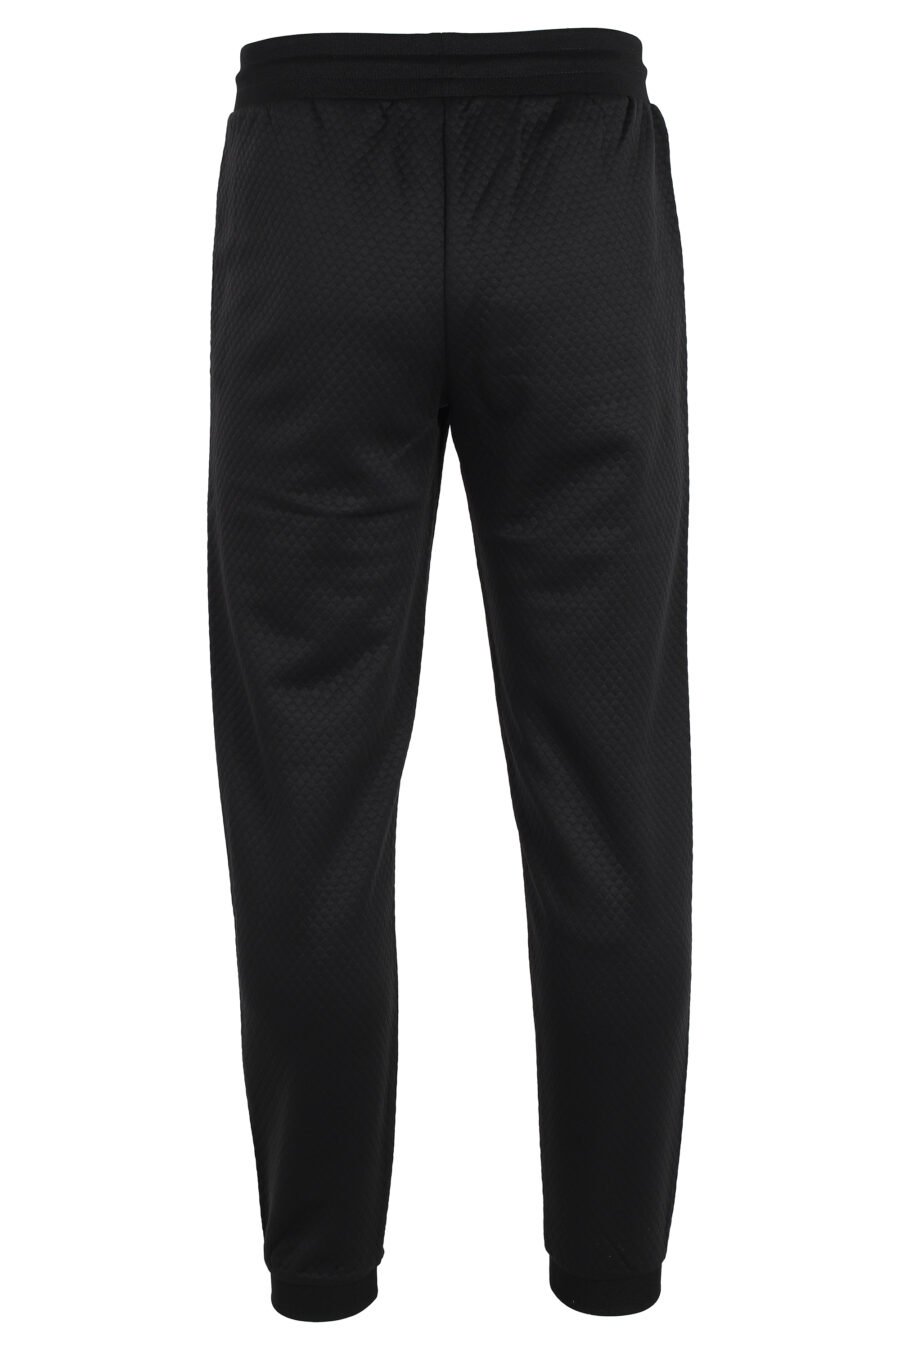 Tracksuit bottoms black with gold plaque logo "lux identity" - IMG 4818